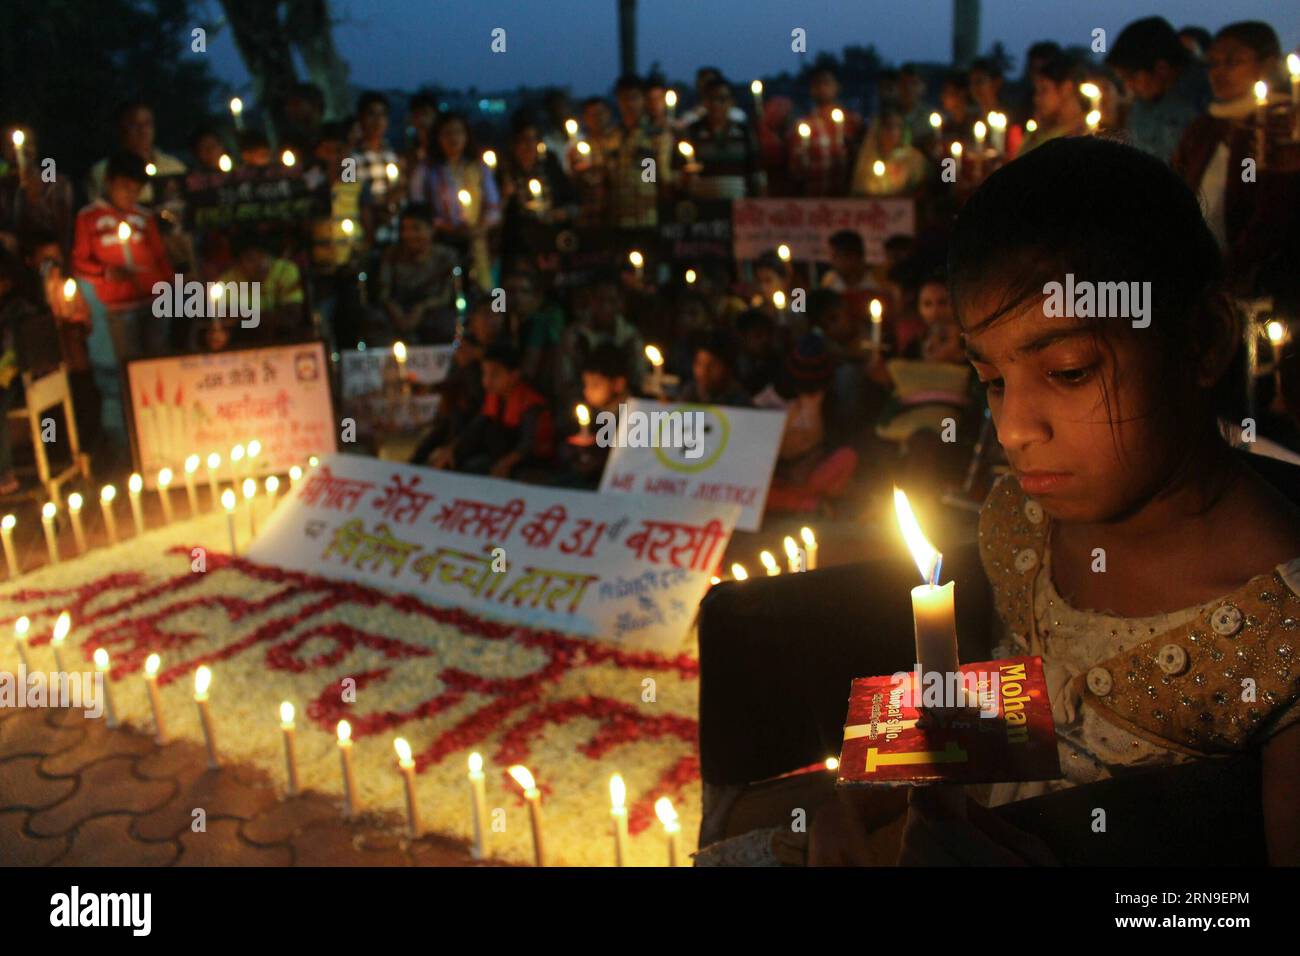 (151202) -- BHOPAL, Dec. 1, 2015 () -- Survivors descendants with congenital disabilities light candles during a vigil marking the 31st anniversary of the gas tragedy in Bhopal, India, Dec. 1, 2015. More than 15,000 residents were killed by the gas leakage from the Union Carbide pesticide plant on the night of Dec. 1 to 3, 1984 in Bhopal, considered the world s worst industrial disaster. (/Stringer) INDIA-BHOPAL-BHOPAL DISASTER-CONDOLENCE Xinhua PUBLICATIONxNOTxINxCHN   151202 Bhopal DEC 1 2015 Survivors descendants With congenital Disabilities Light Candles during a Vigil marking The 31st Ann Stock Photo